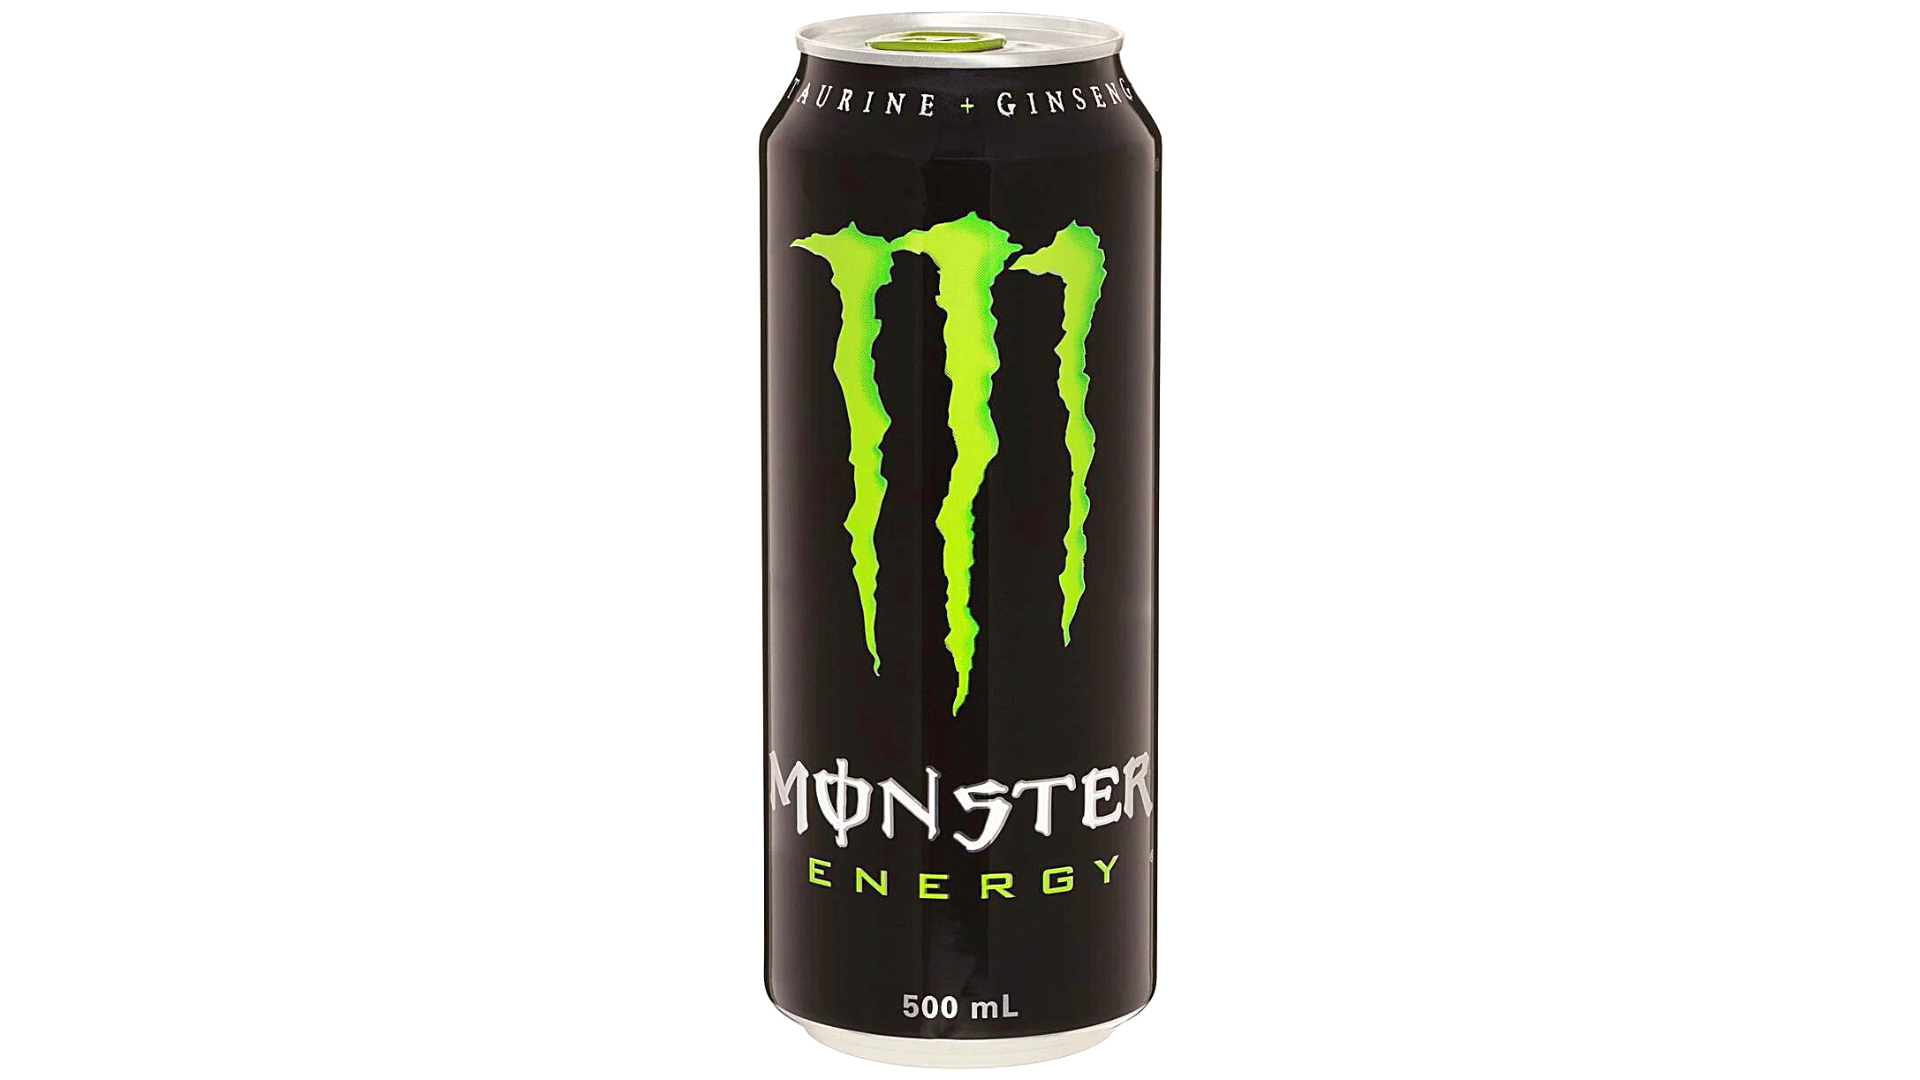 Australian Monster Energy Drinks 500ml (8 Flavours) – HEDGY TIME